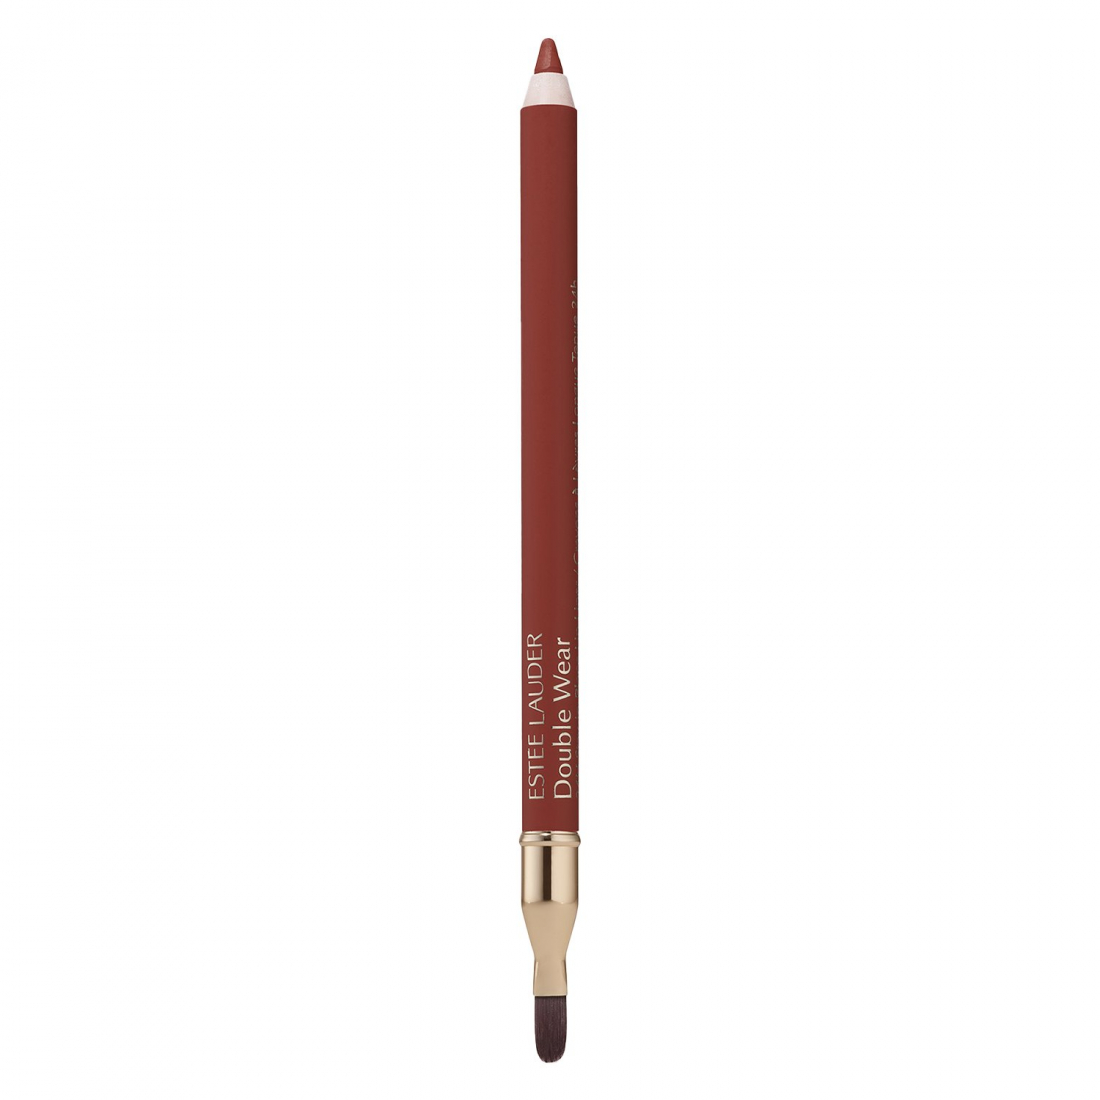 'Double Wear 24H Stay-In-Place' Lippen-Liner - Spice 1.2 g